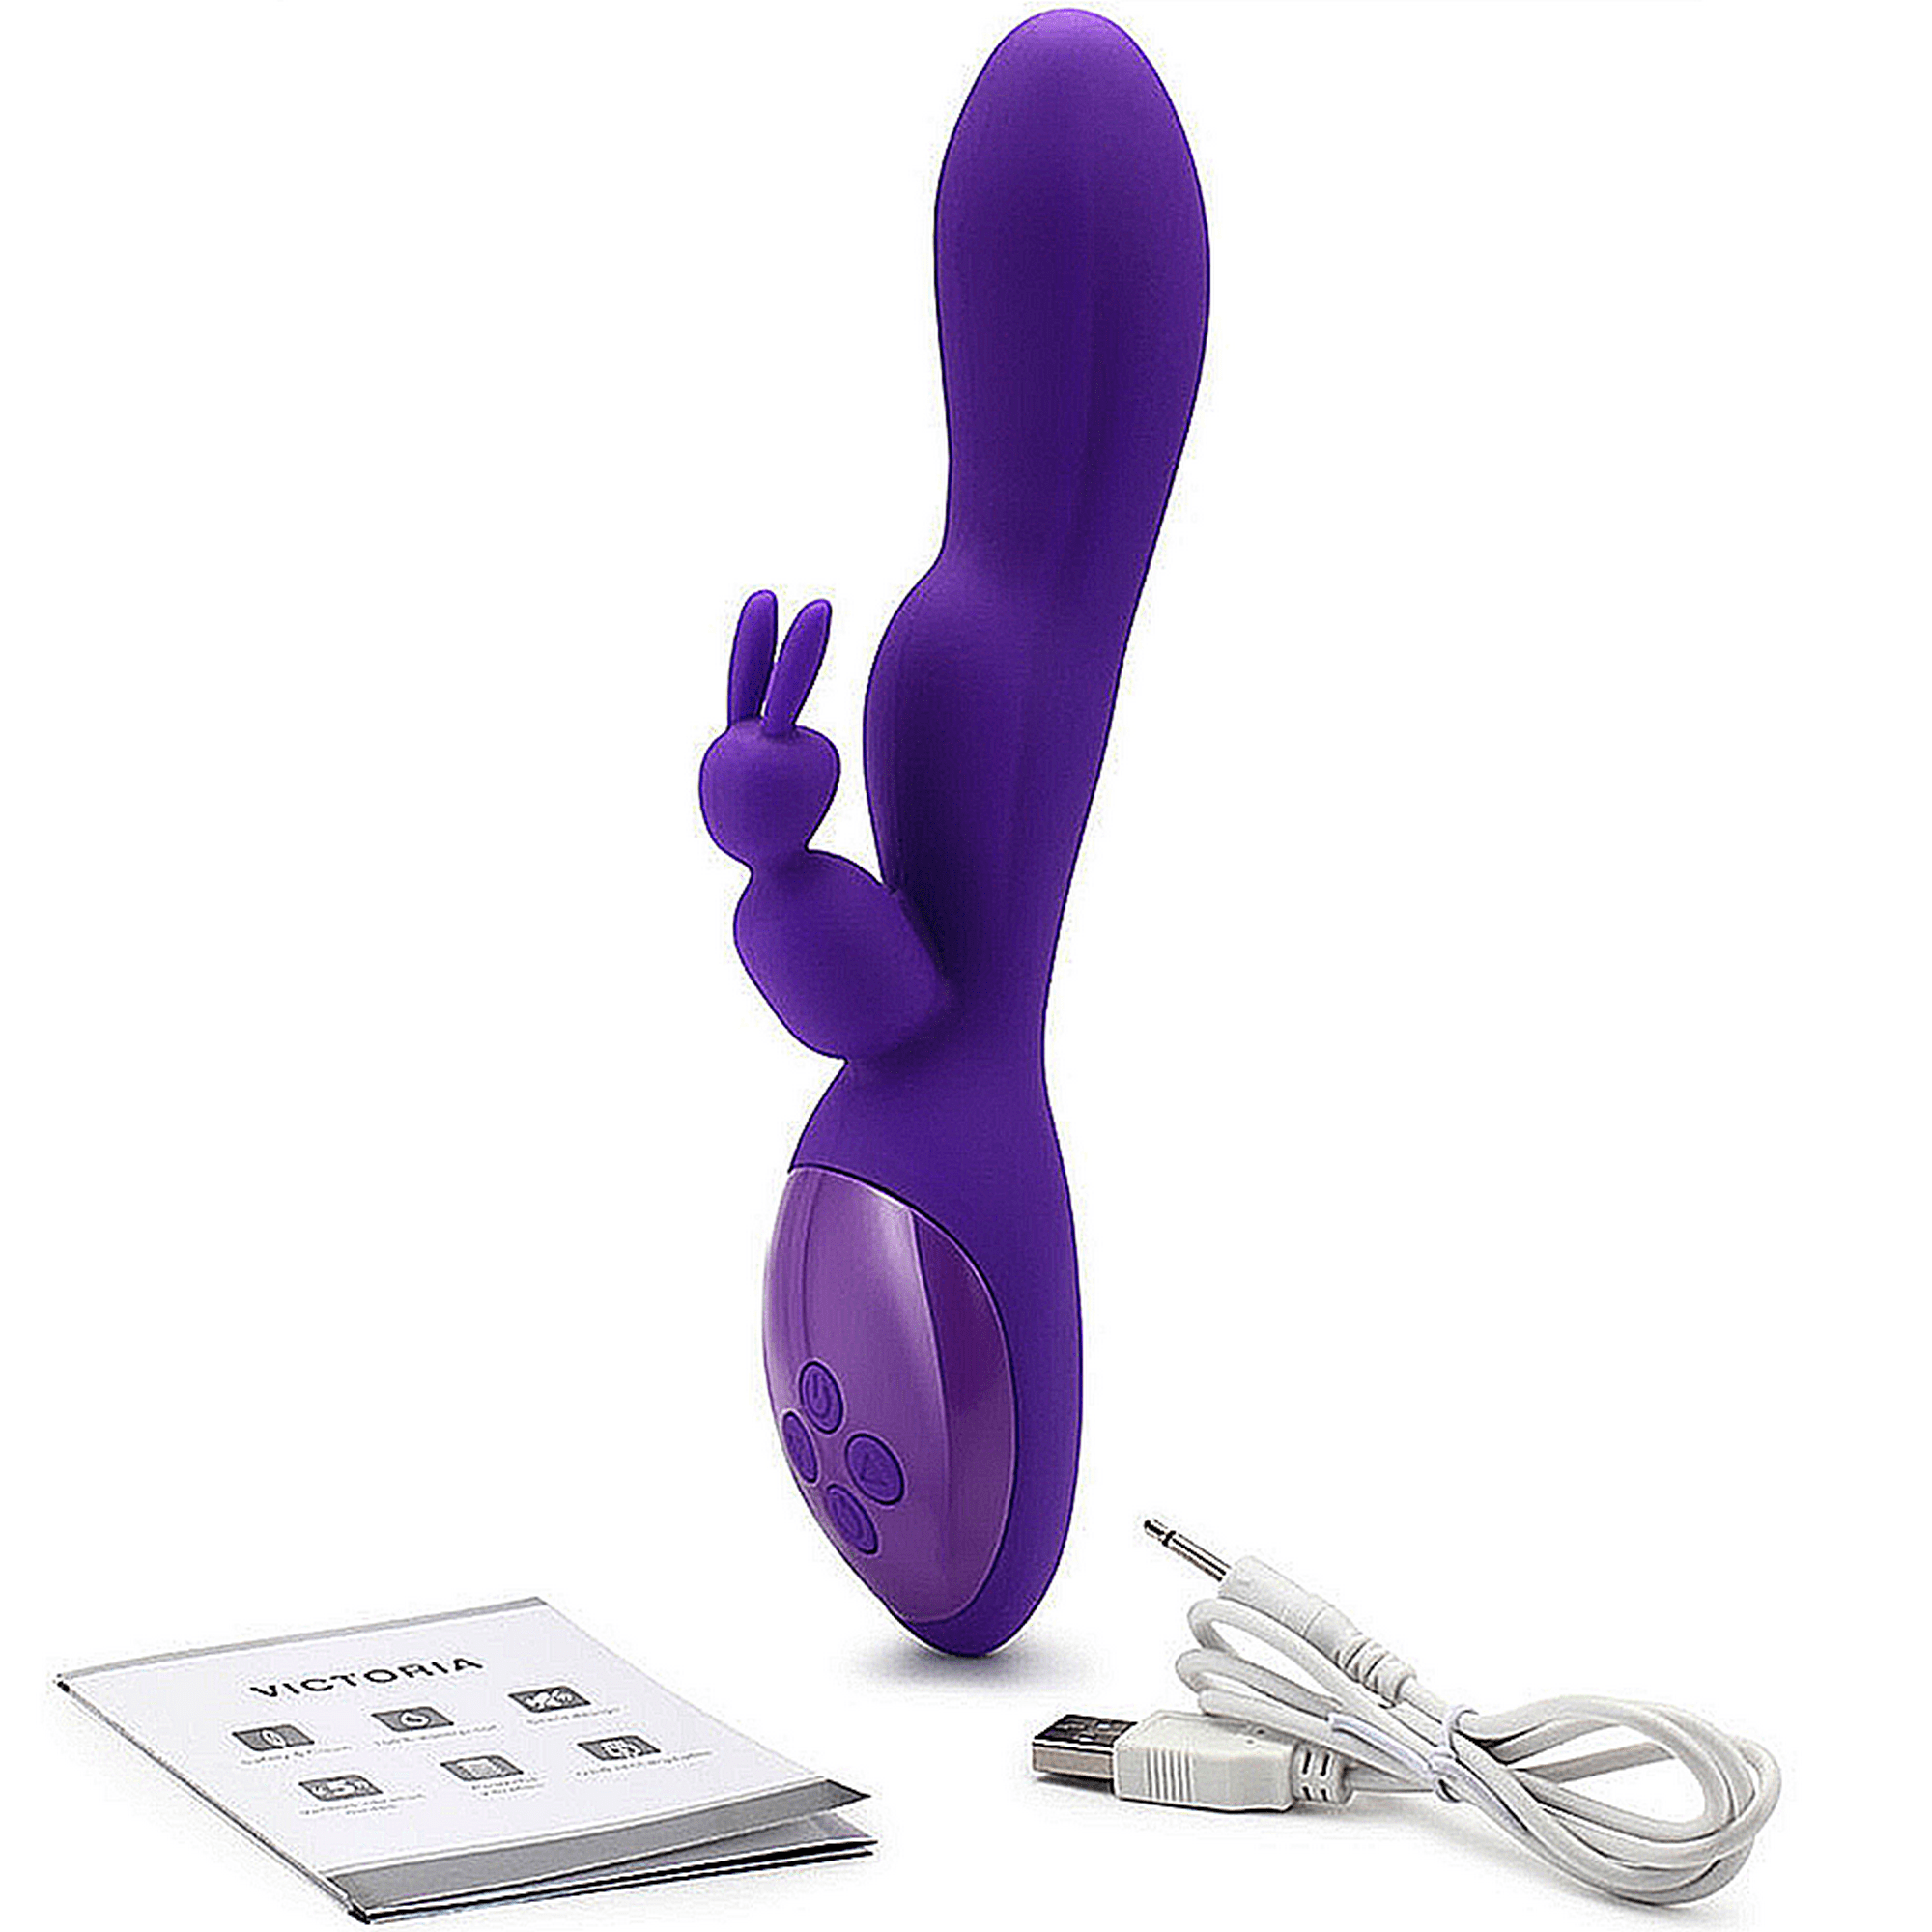 LotFancy Rabbit Vibrator for Women, G Spot and Clitoral Stimulator, Adult Sex Toys for Couple, Purple hq nude image